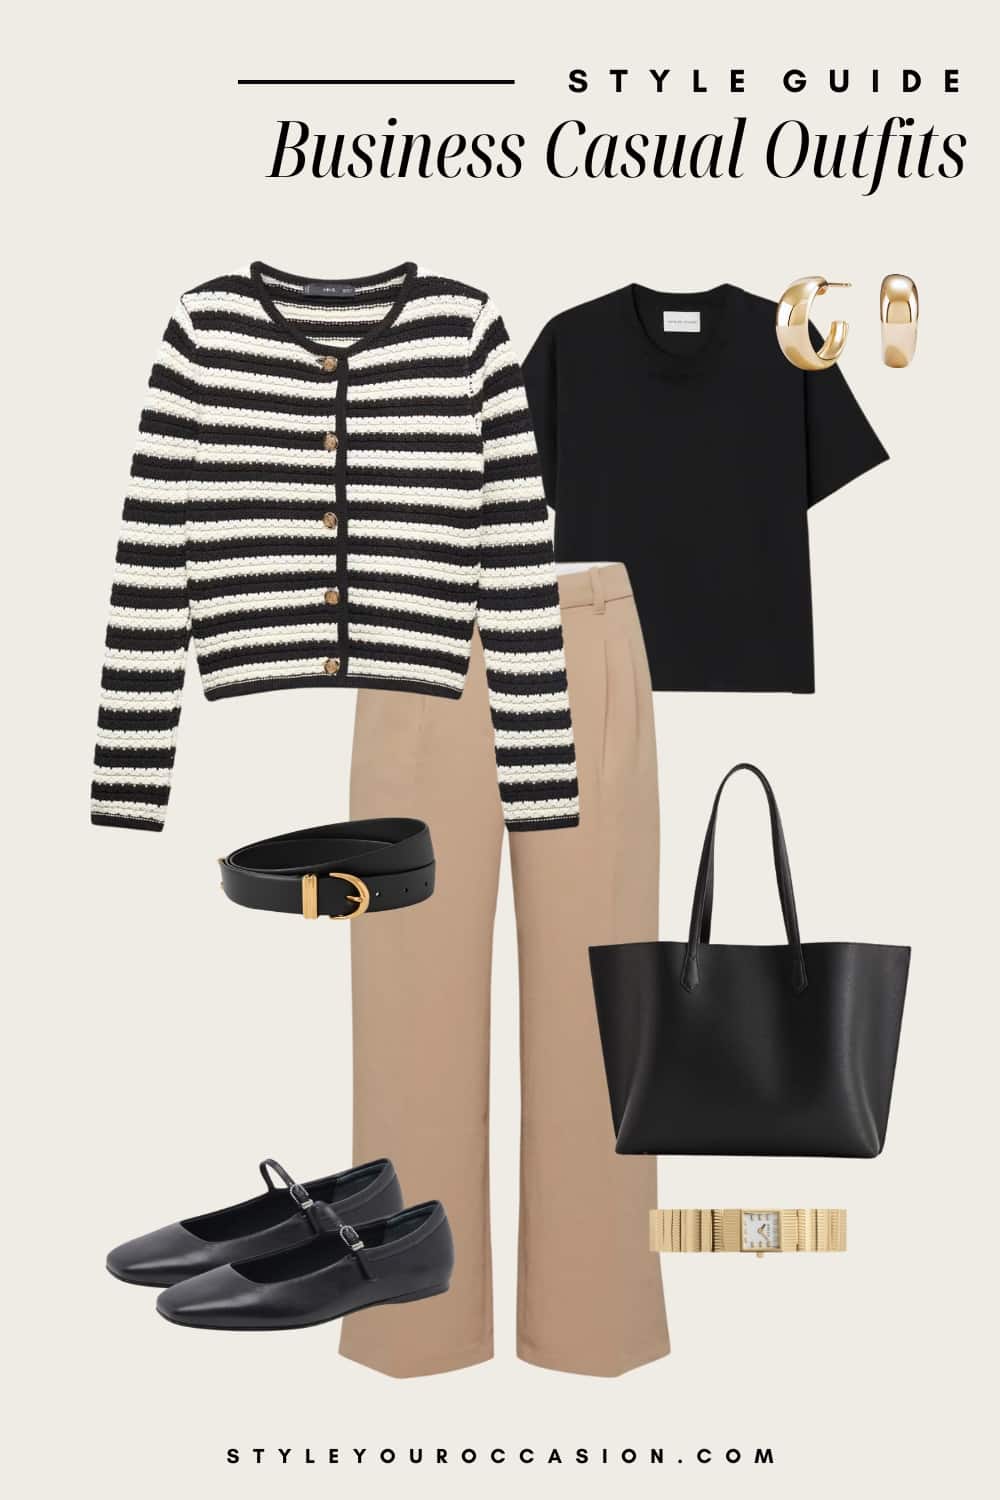 an image board of a business casual outfit featuring beige trousers, a black tee, a striped cardigan, black Mary Jane flats, and black and gold accessories